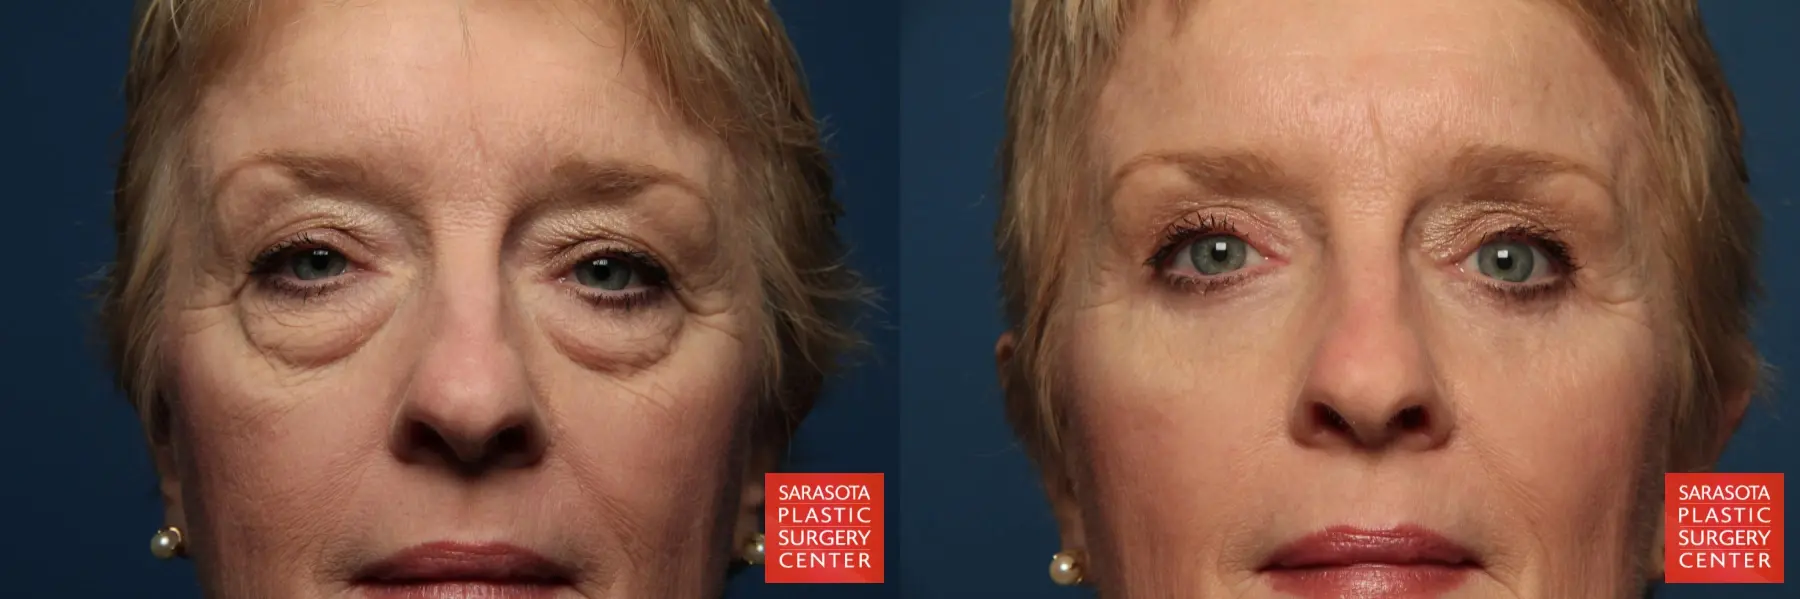 Eyelid Lift: Patient 1 - Before and After 1